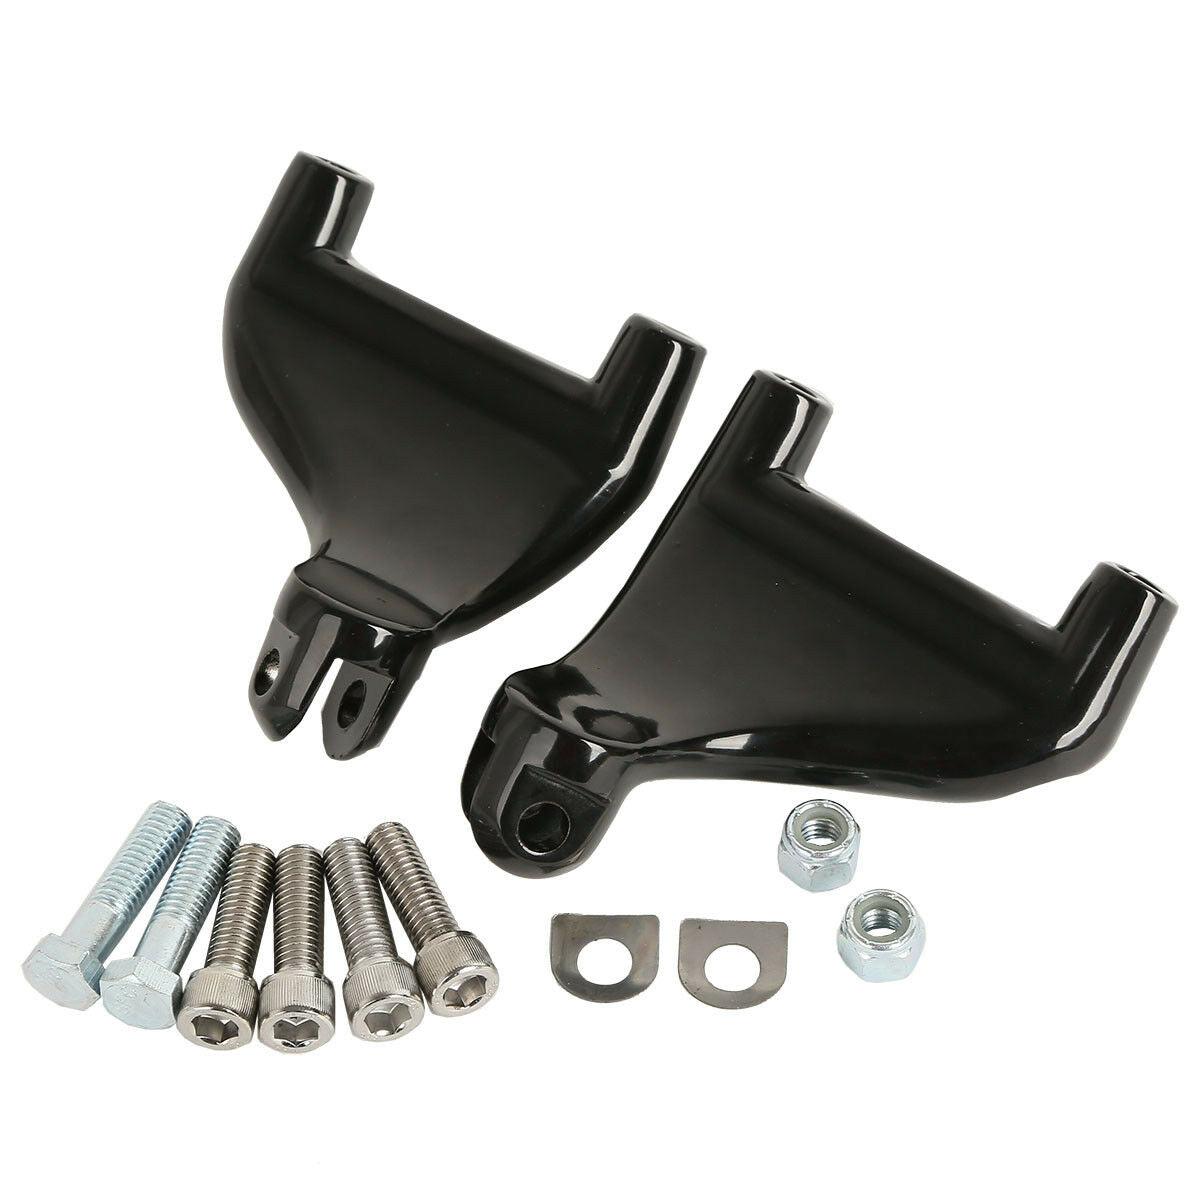 Black Rear Passenger Footpegs Mount Fit For Harley Sportster XL 883 1200 04-13 - Moto Life Products